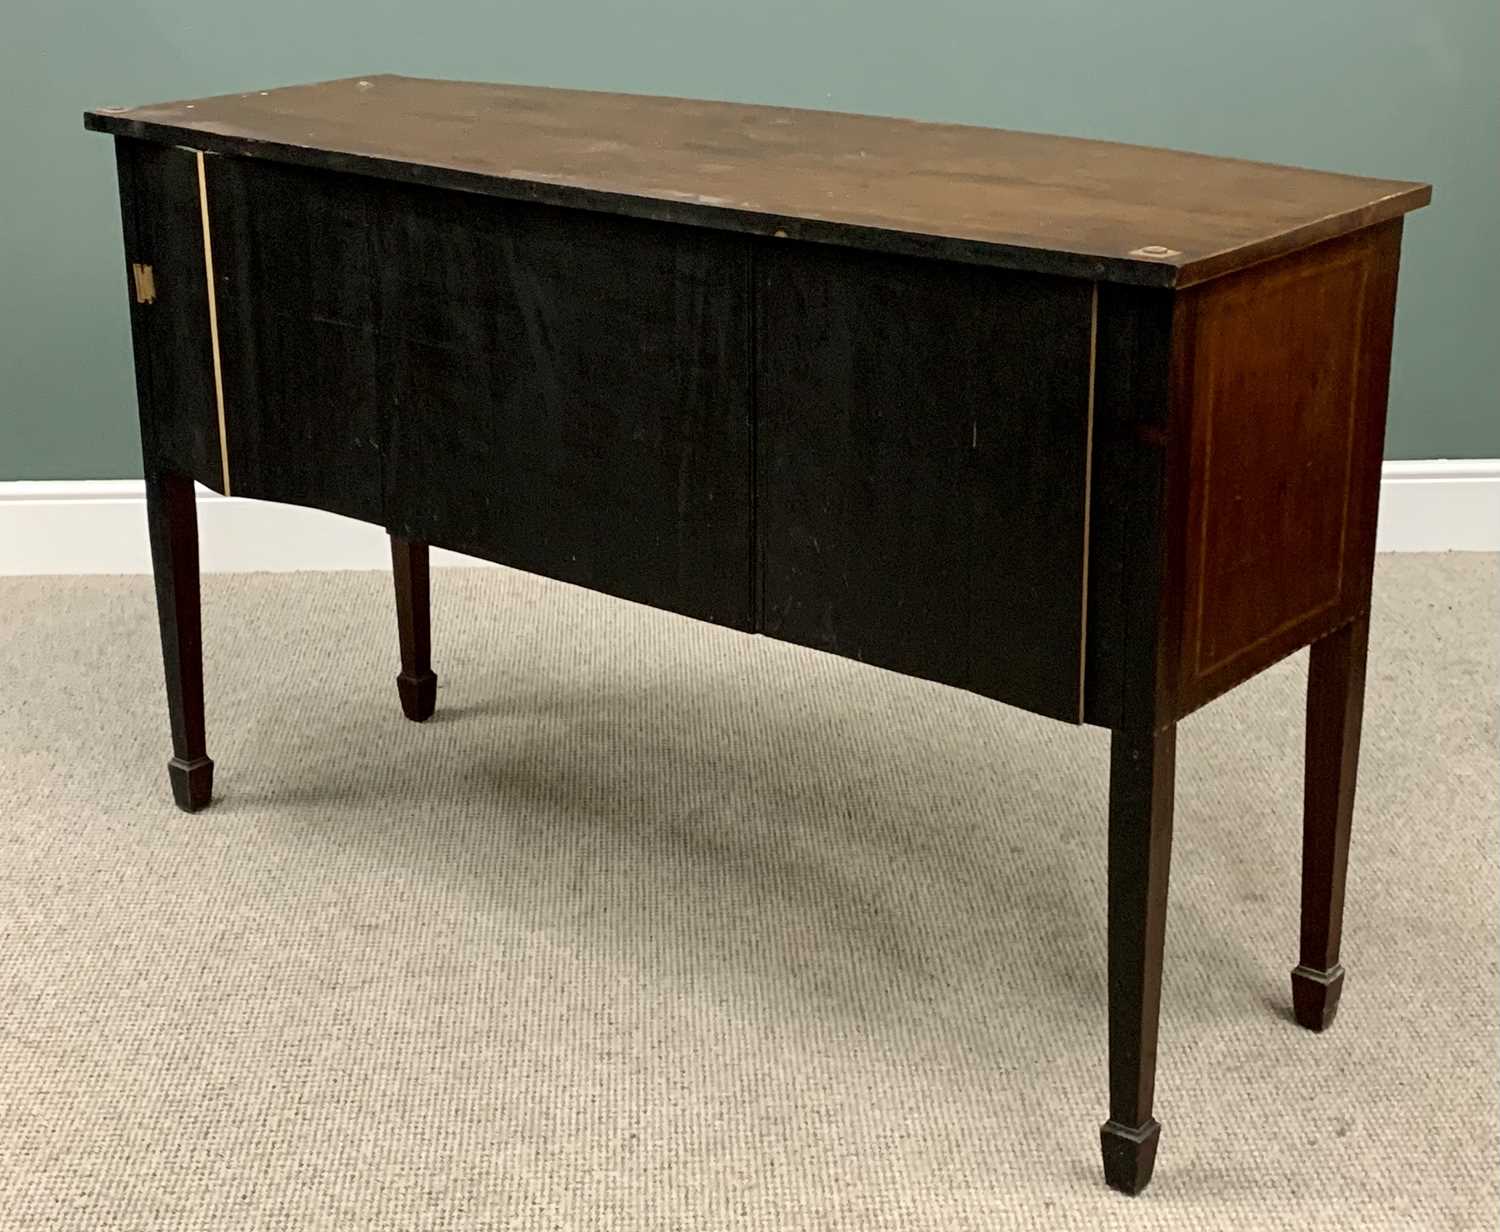 REGENCY STRING INLAID MAHOGANY SIDEBOARD - bow fronted, on spade feet, 94cms H, 154cms W, 59cms D - Image 3 of 6